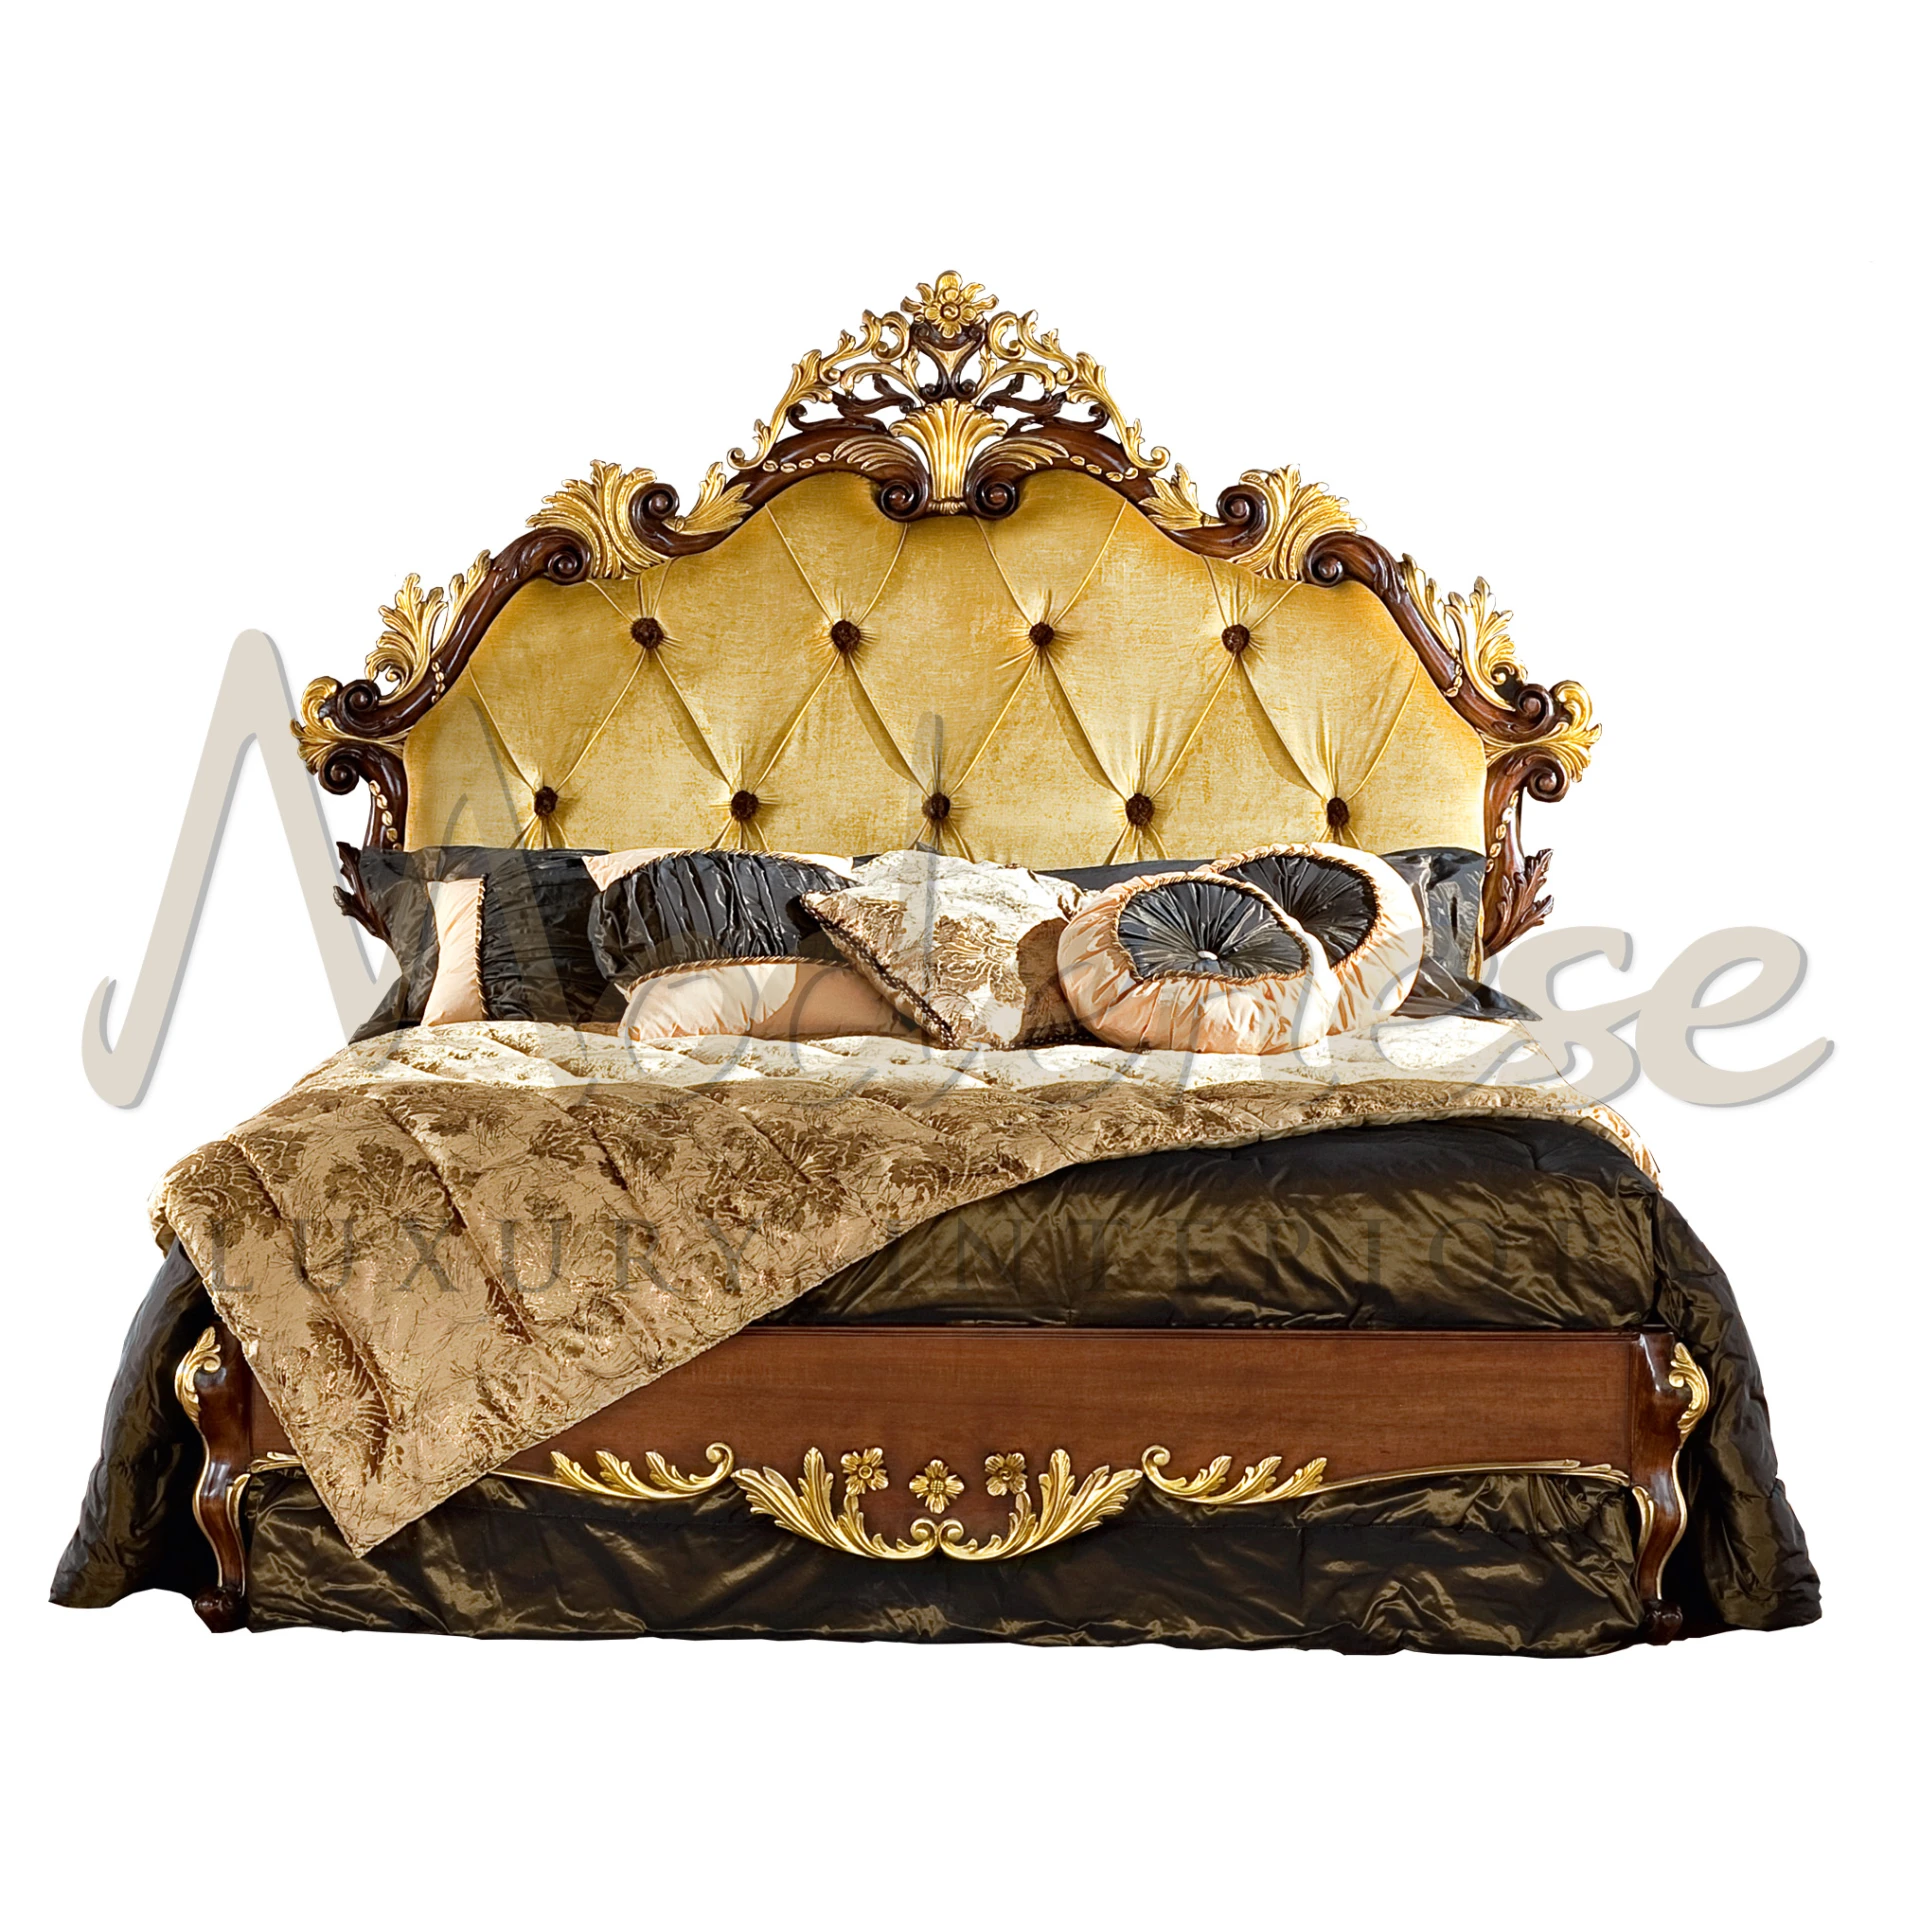 An extravagant bed with a striking headboard, richly upholstered in golden fabric with diamond tufting and adorned with ornate carvings at the crest. 